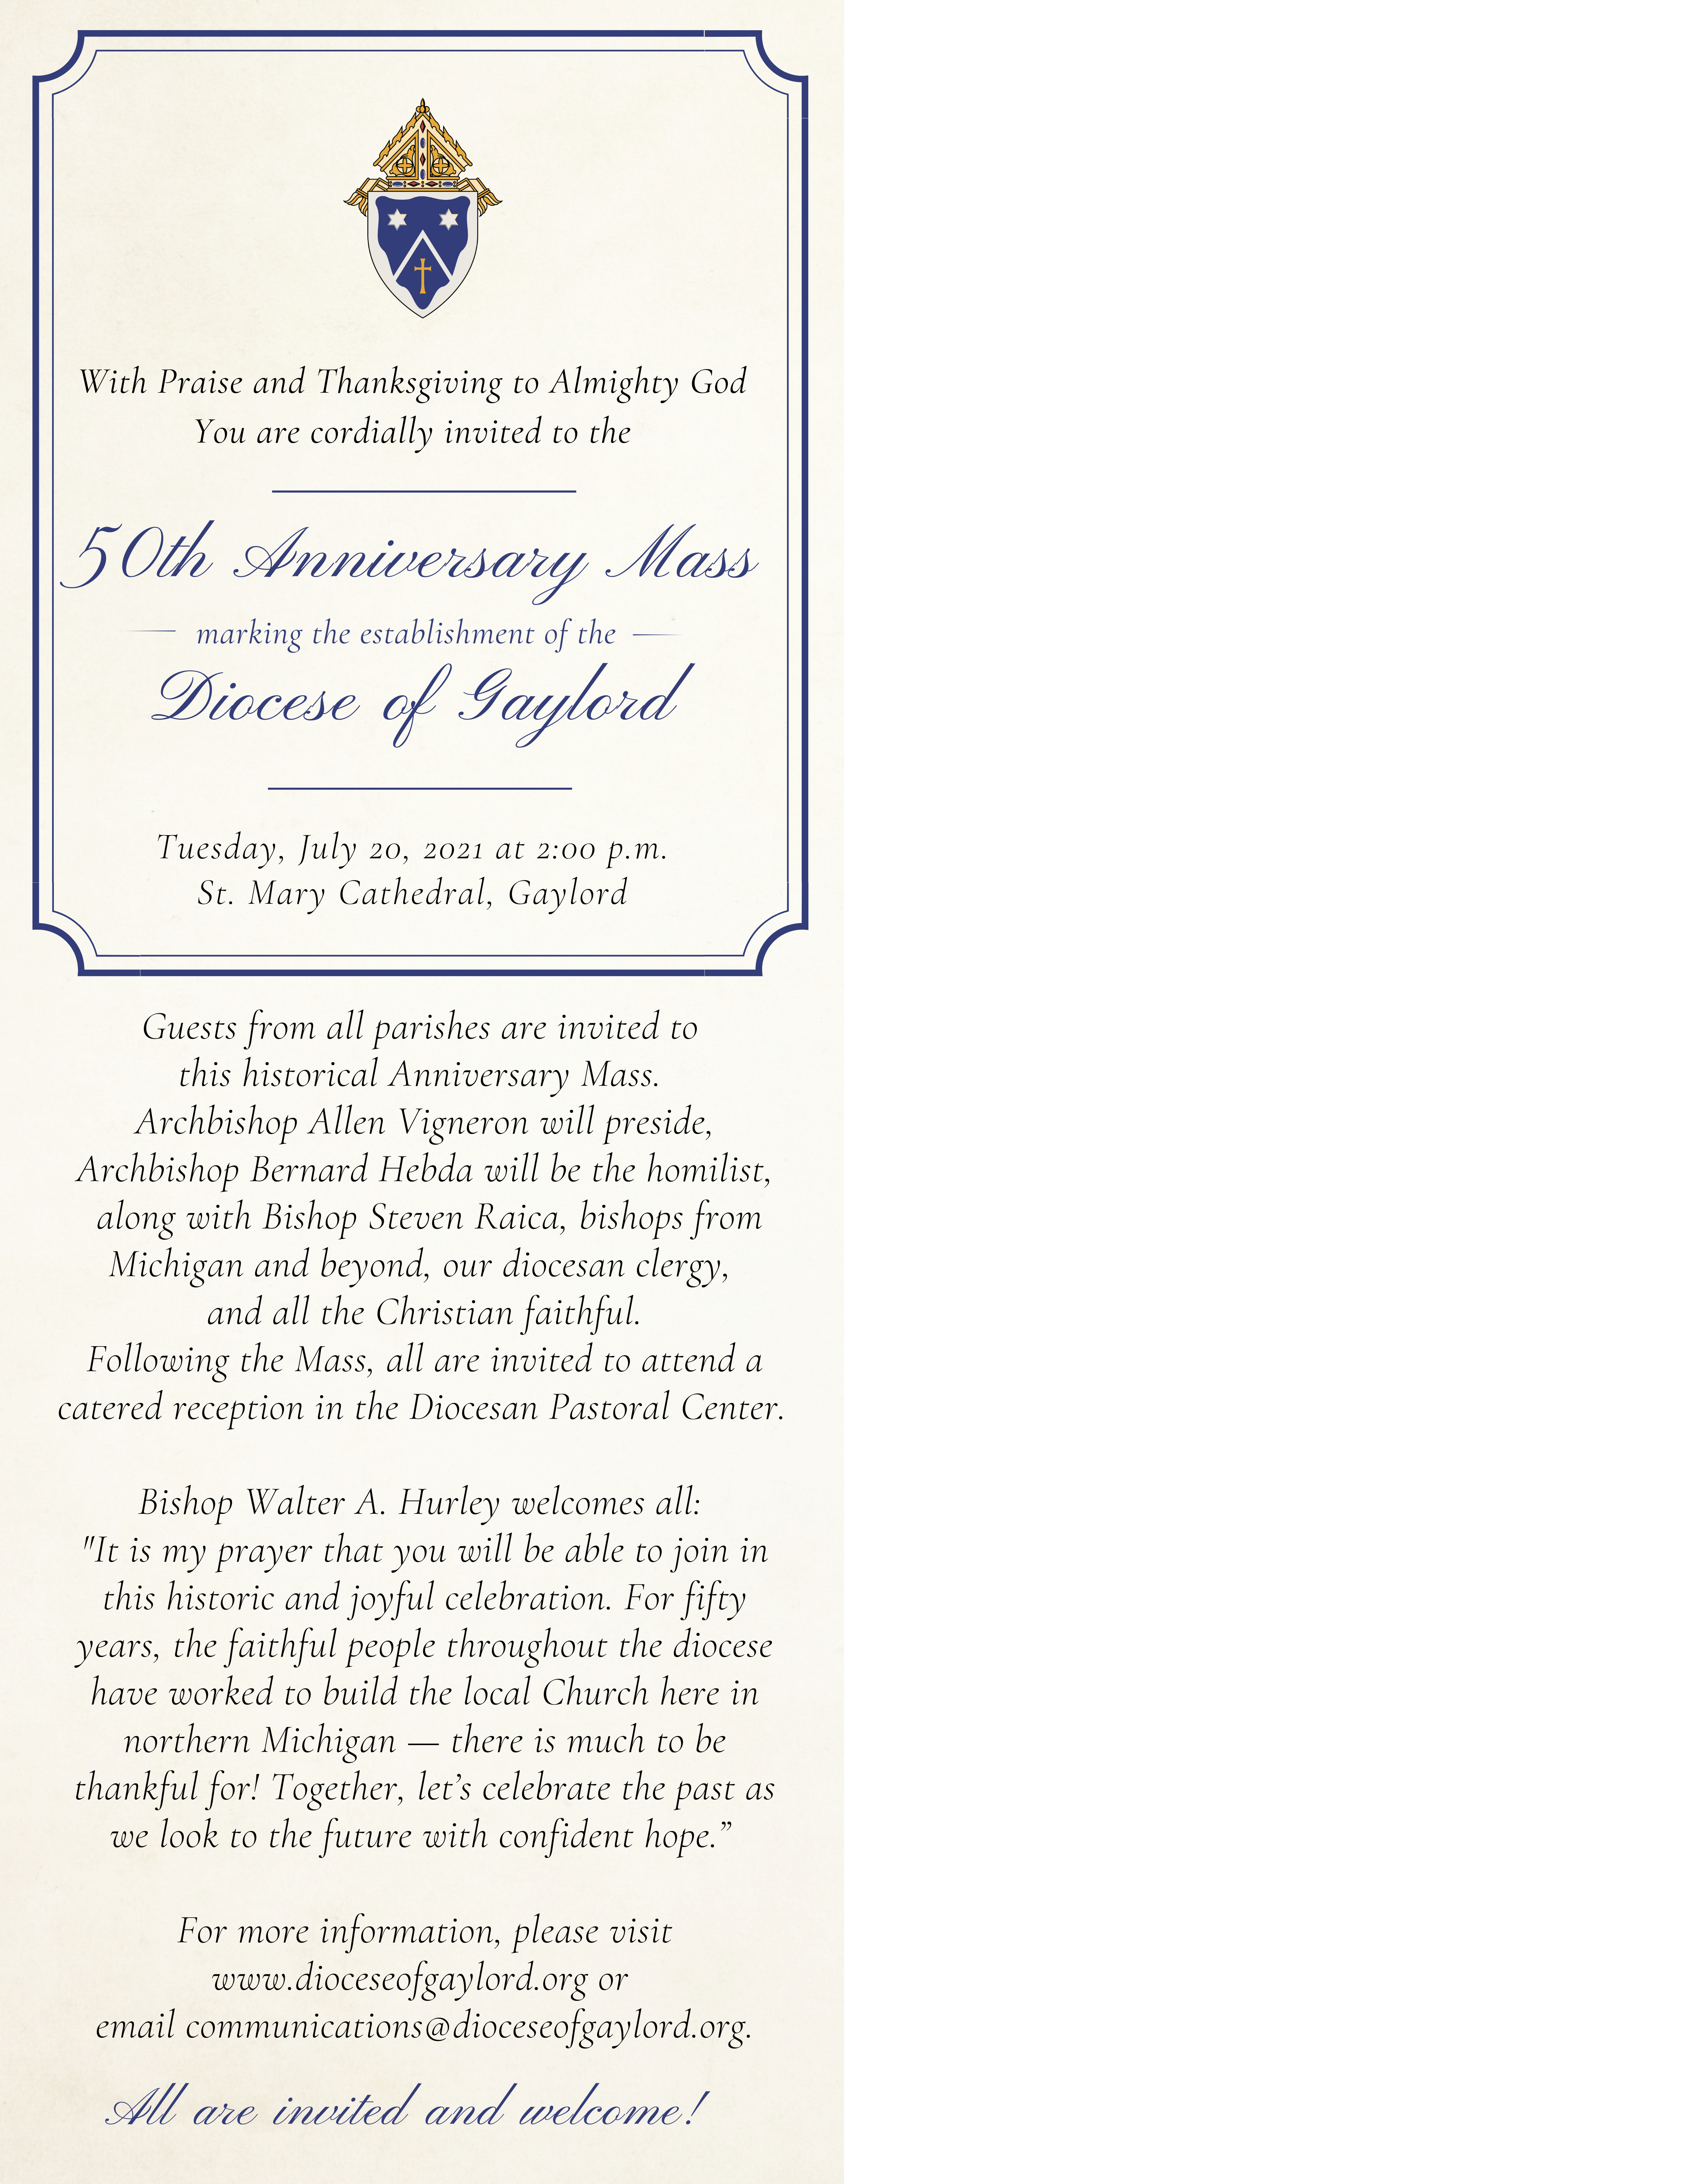 (PNG Image File) Half Page Bulletin Insert - 50th Anniversary of Diocese